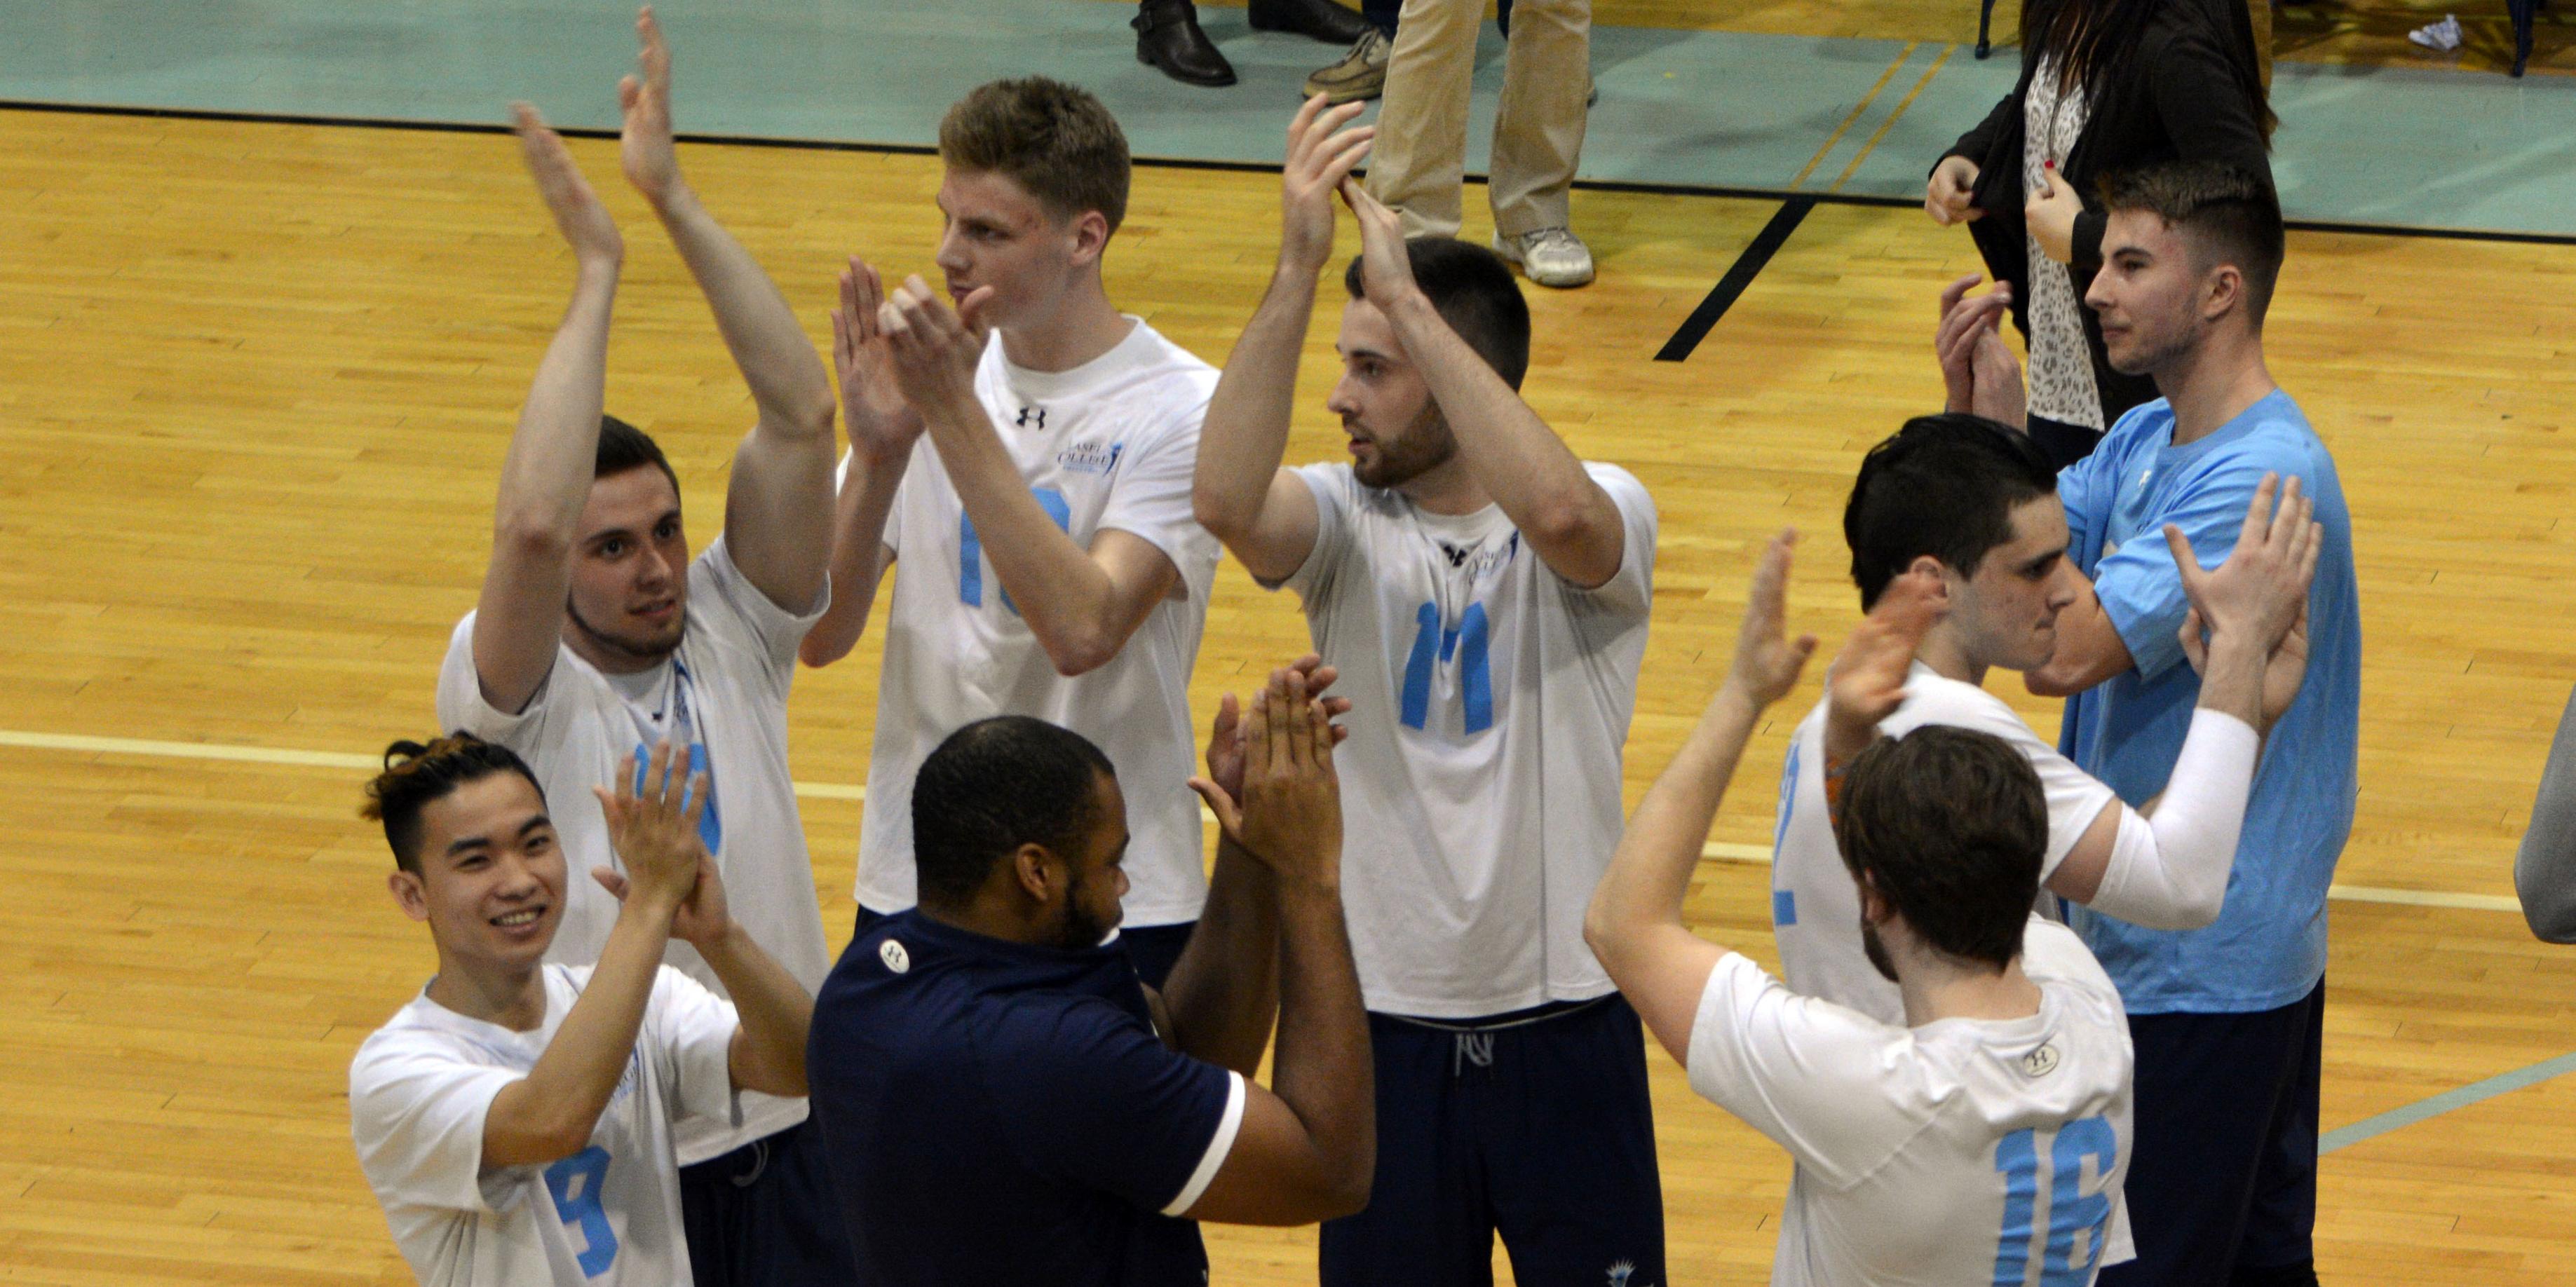 Men’s Volleyball Heads to GNAC Finals After 3-0 Sweep over Wentworth